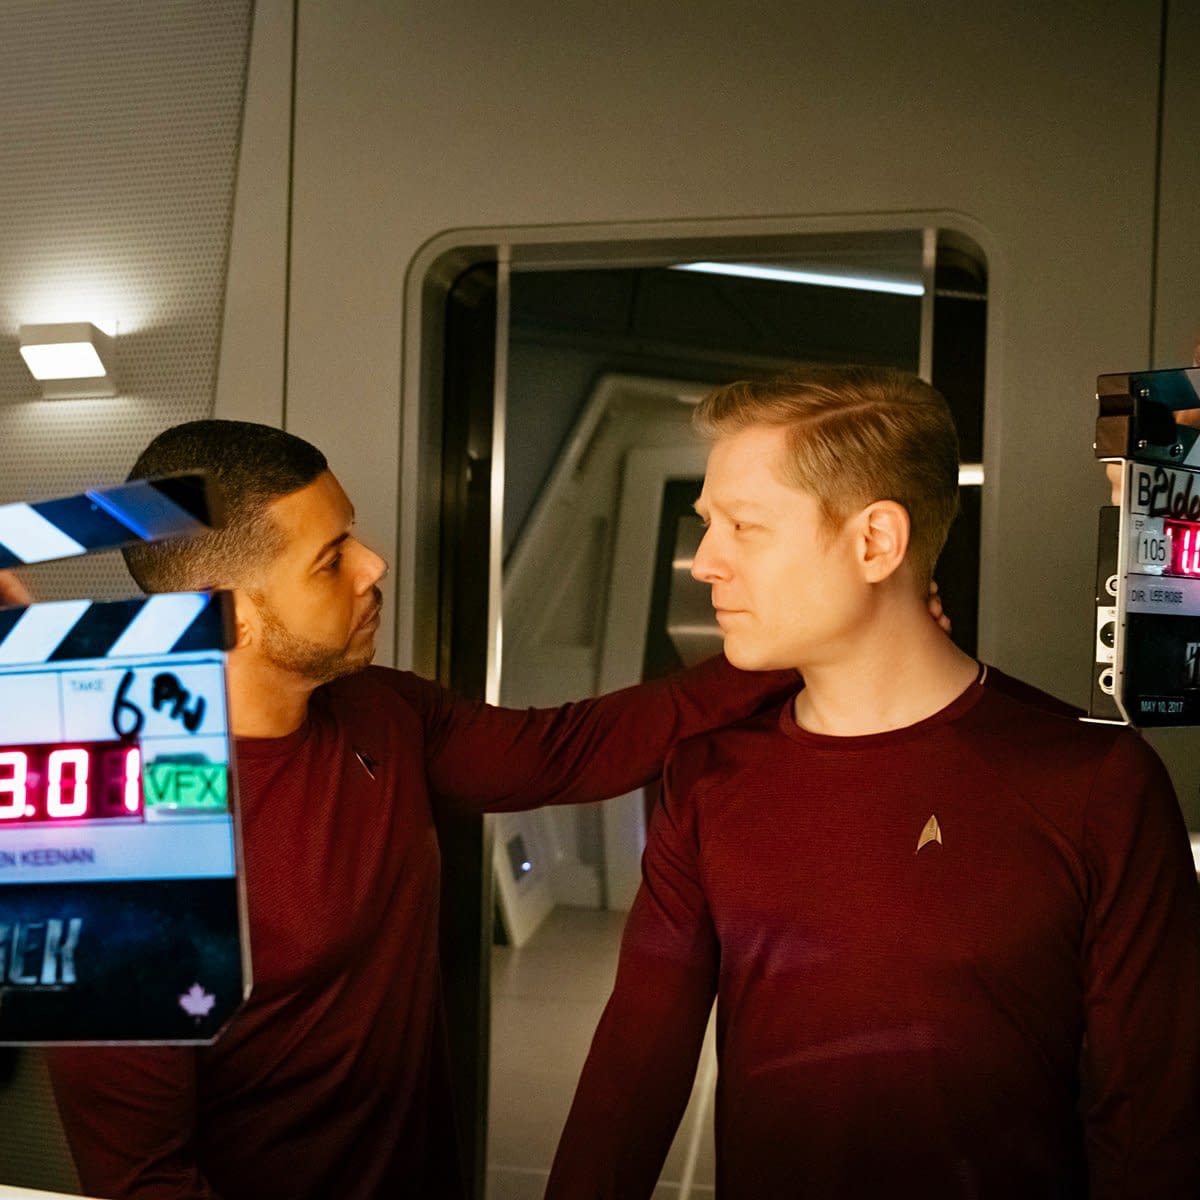 'Star Trek: Discovery' Review &#8211; "Saints Of Imperfection" Ventures Into The Unknown &#8211; and Brings Something Back [SPOILERS]